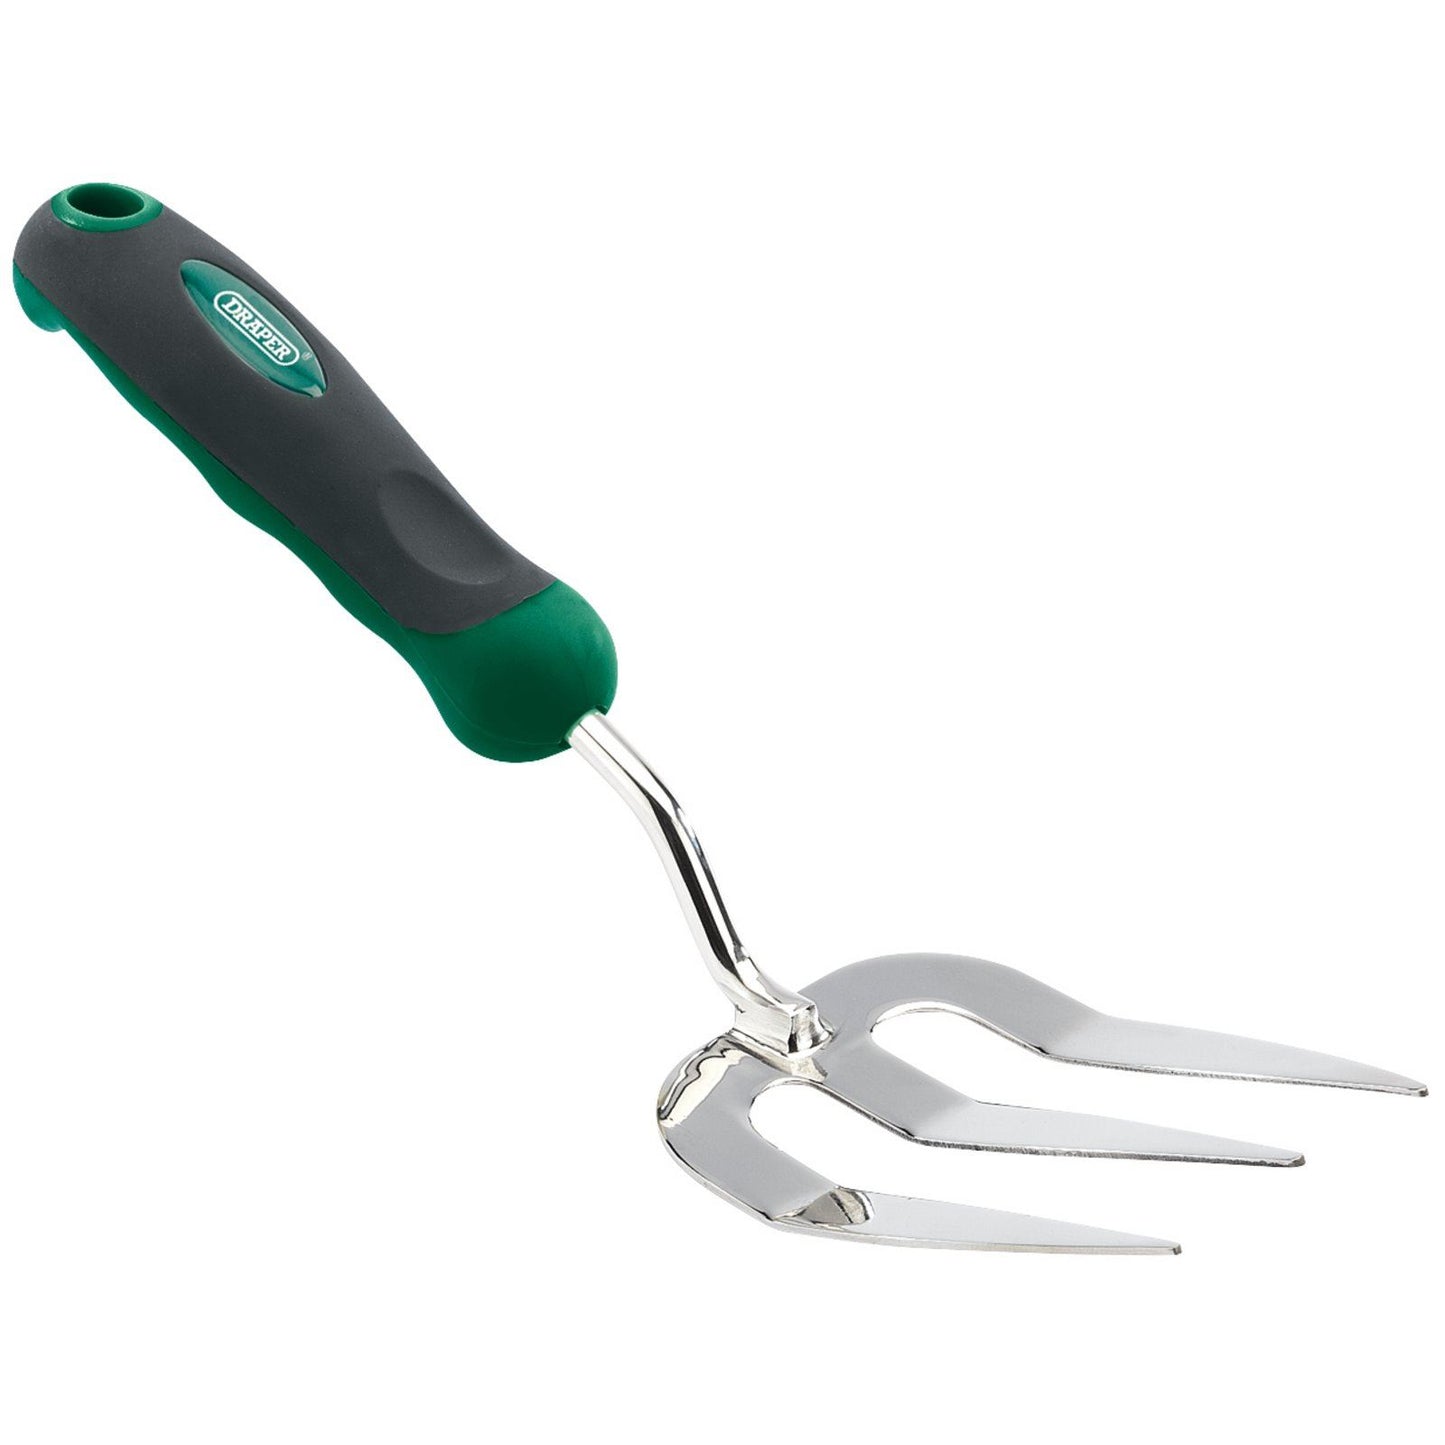 Draper Expert Trowel Stainless Steel Hand Fork with Soft Grip Handle 28287